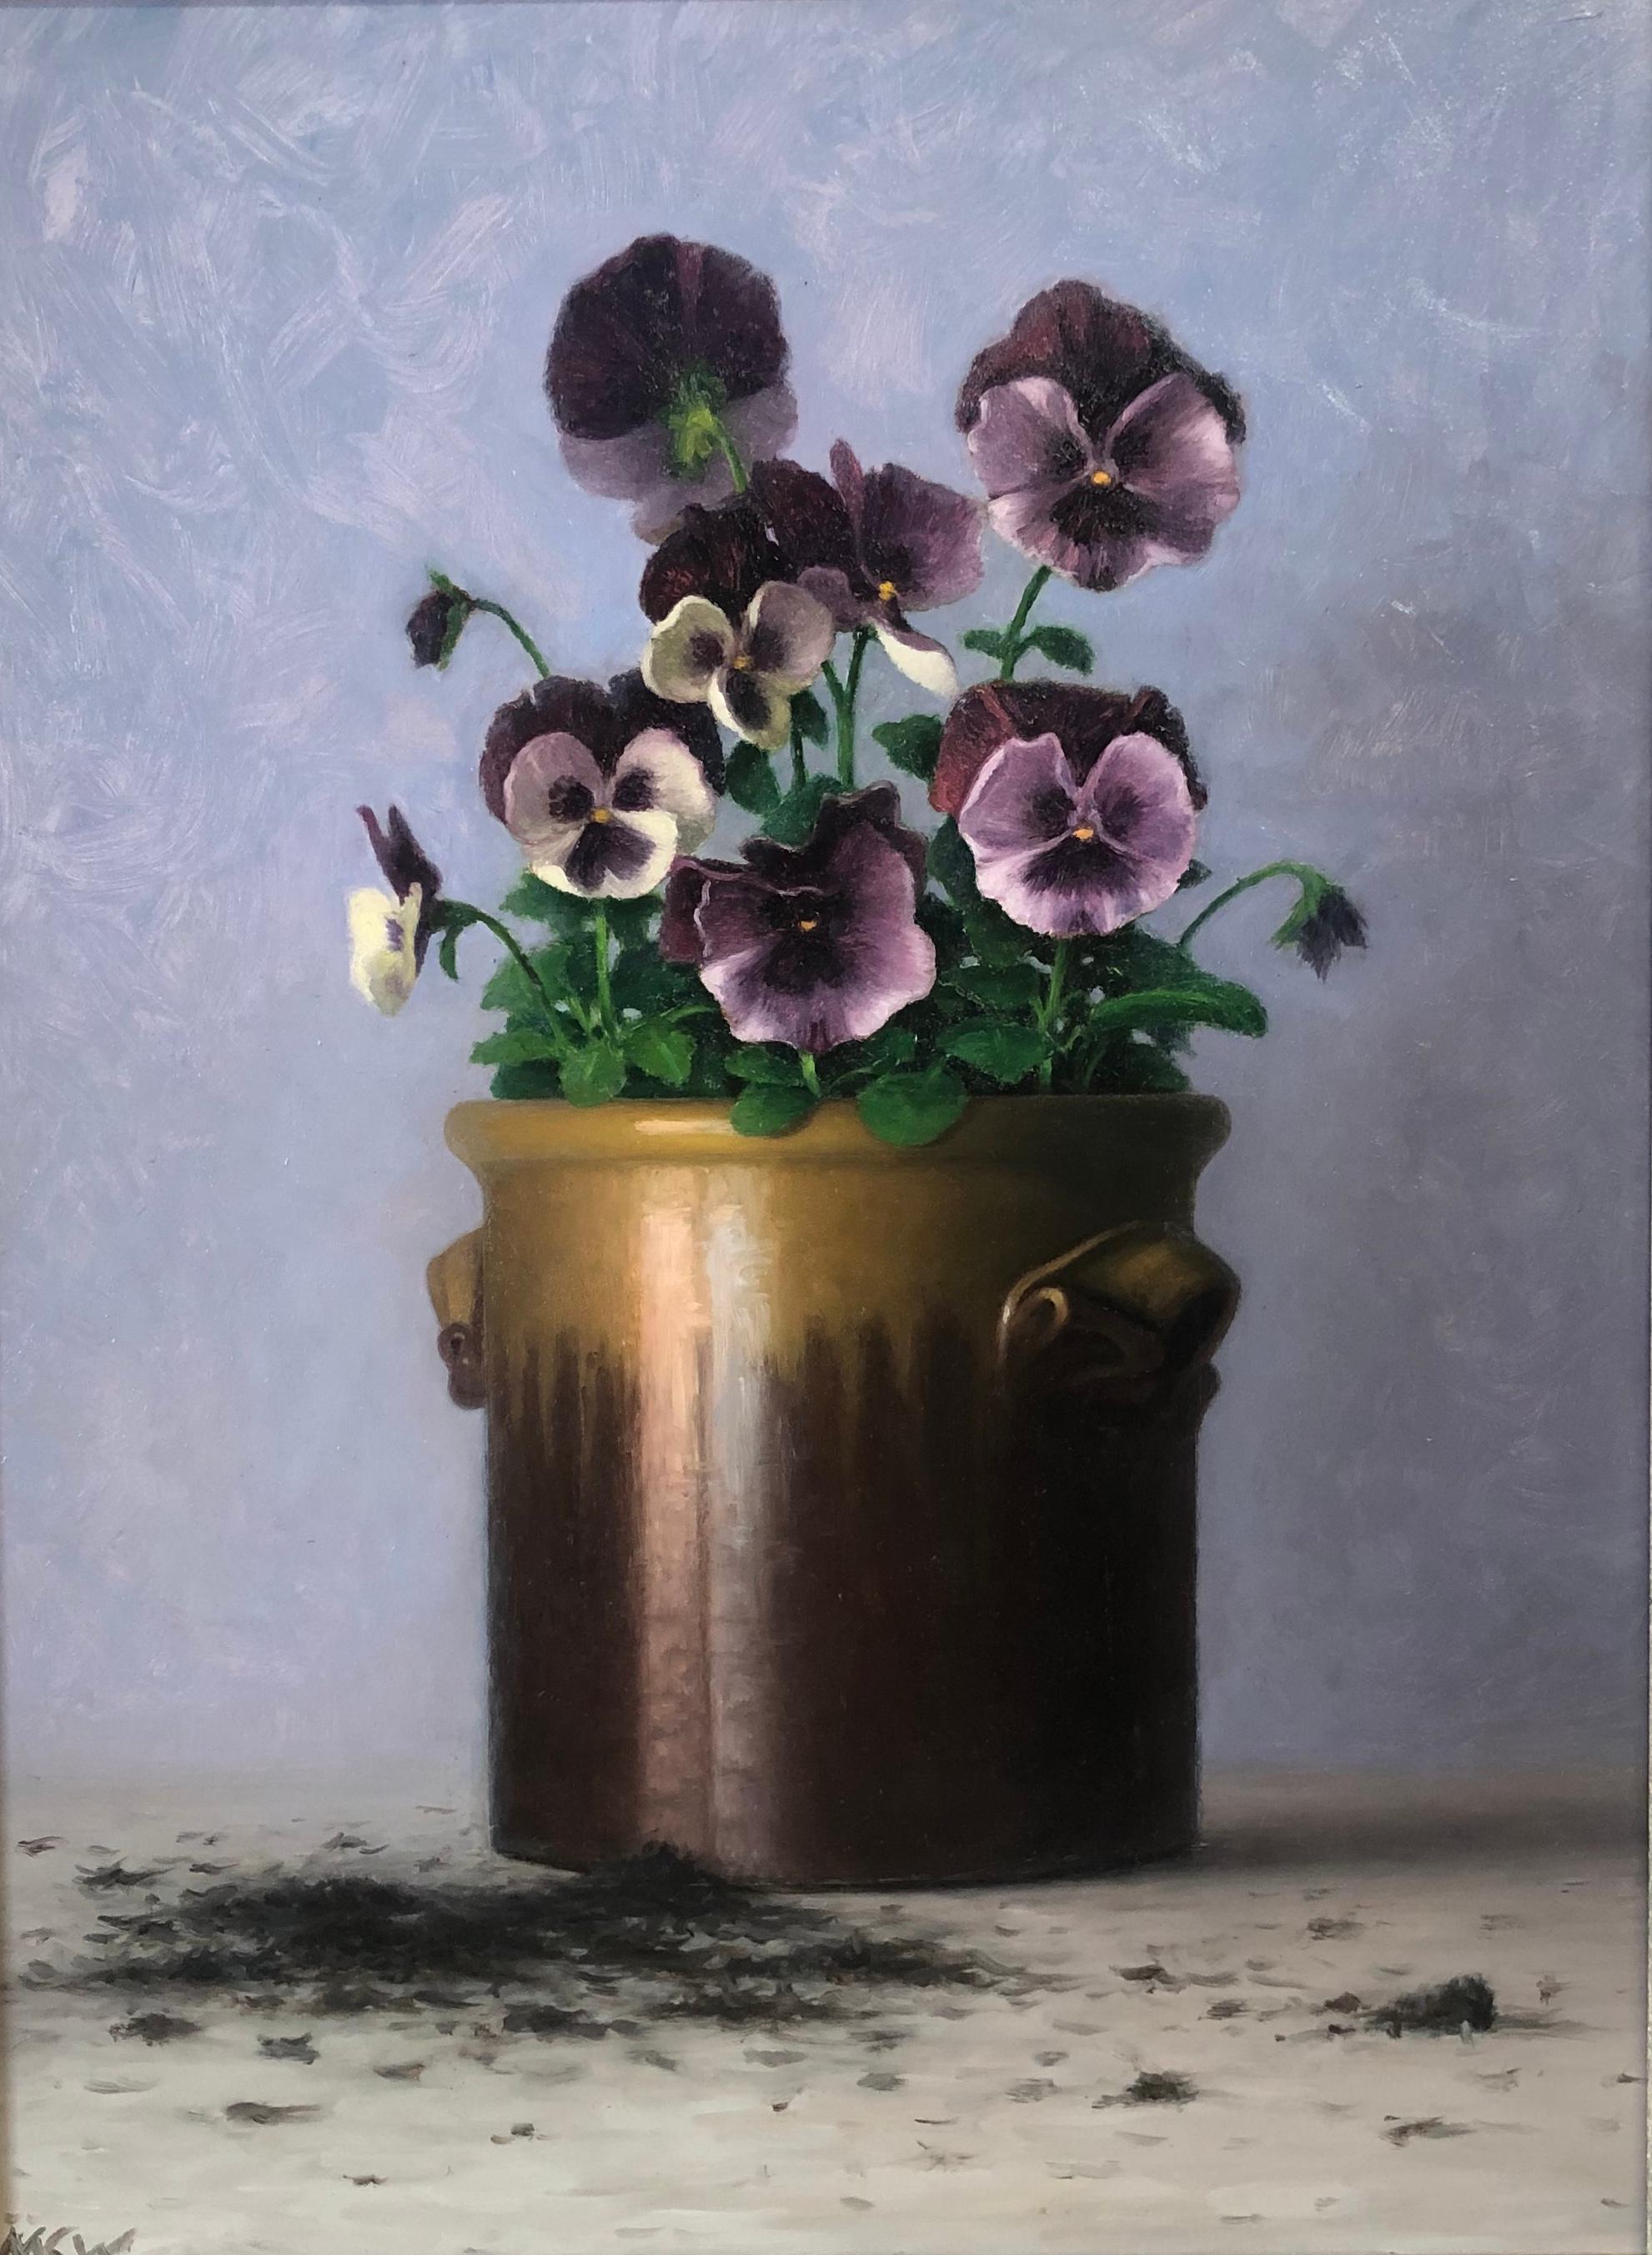 Pansies and Spilled Dirt - Oil painting, by Contemporary American Realist